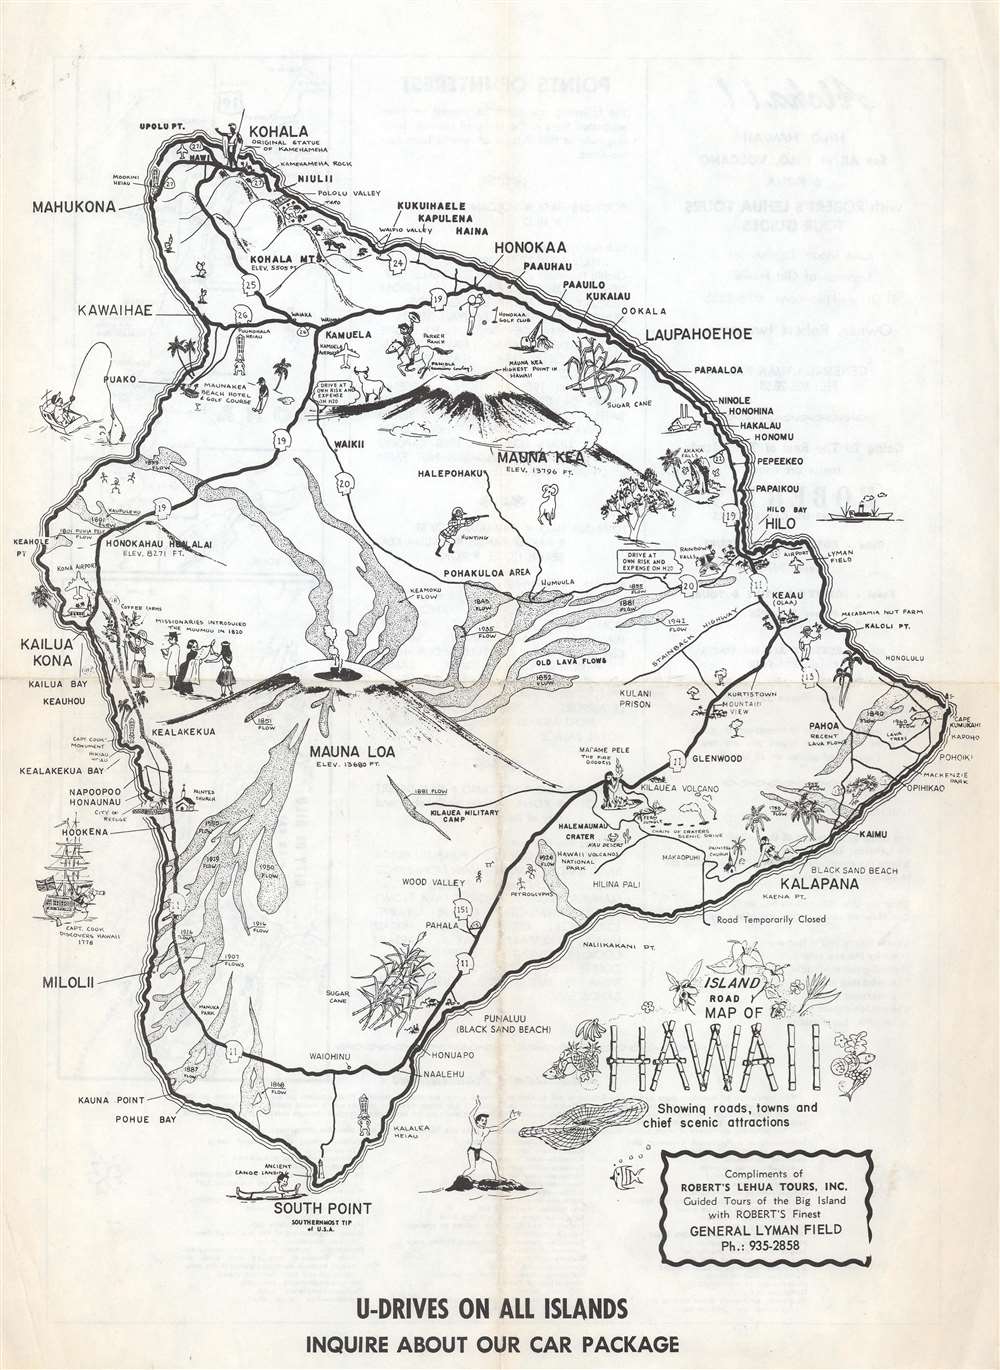 Island Road Map of Hawaii Showing roads, towns and chief scenic attractions. - Main View